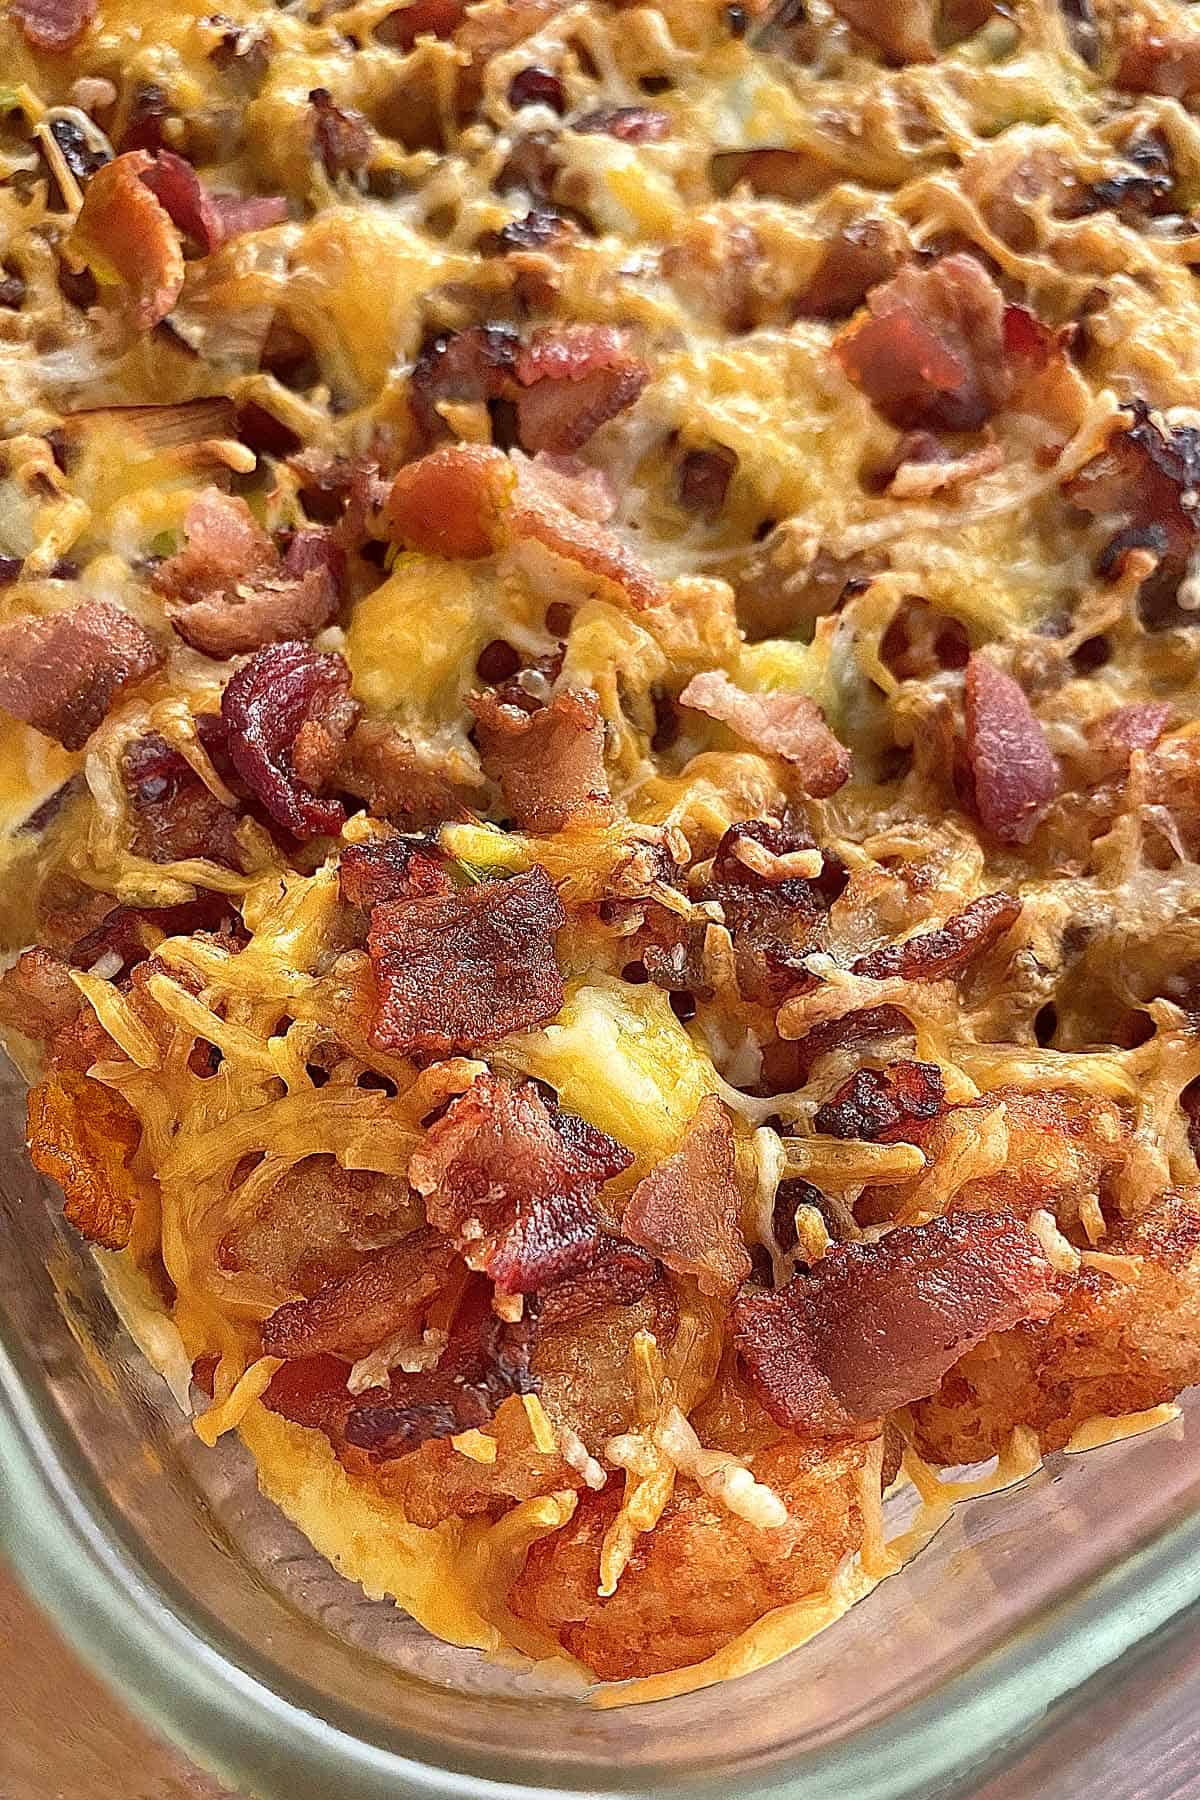 Finished dish of overnight tater tot breakfast casserole with bacon and sausage